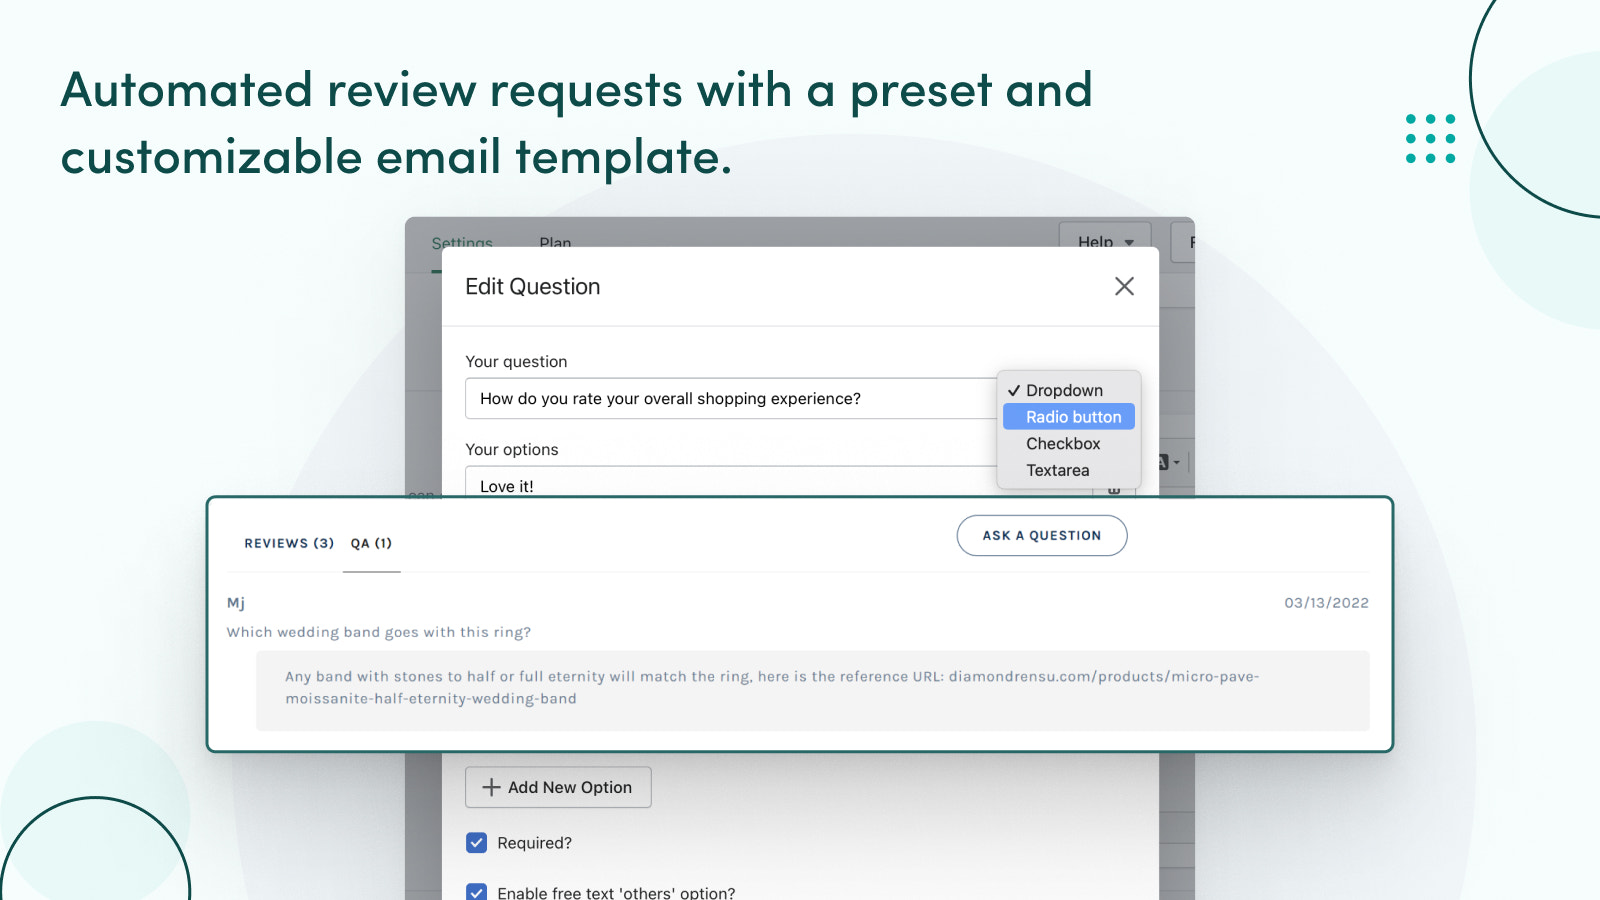 Automate review requests with customizable email presets.